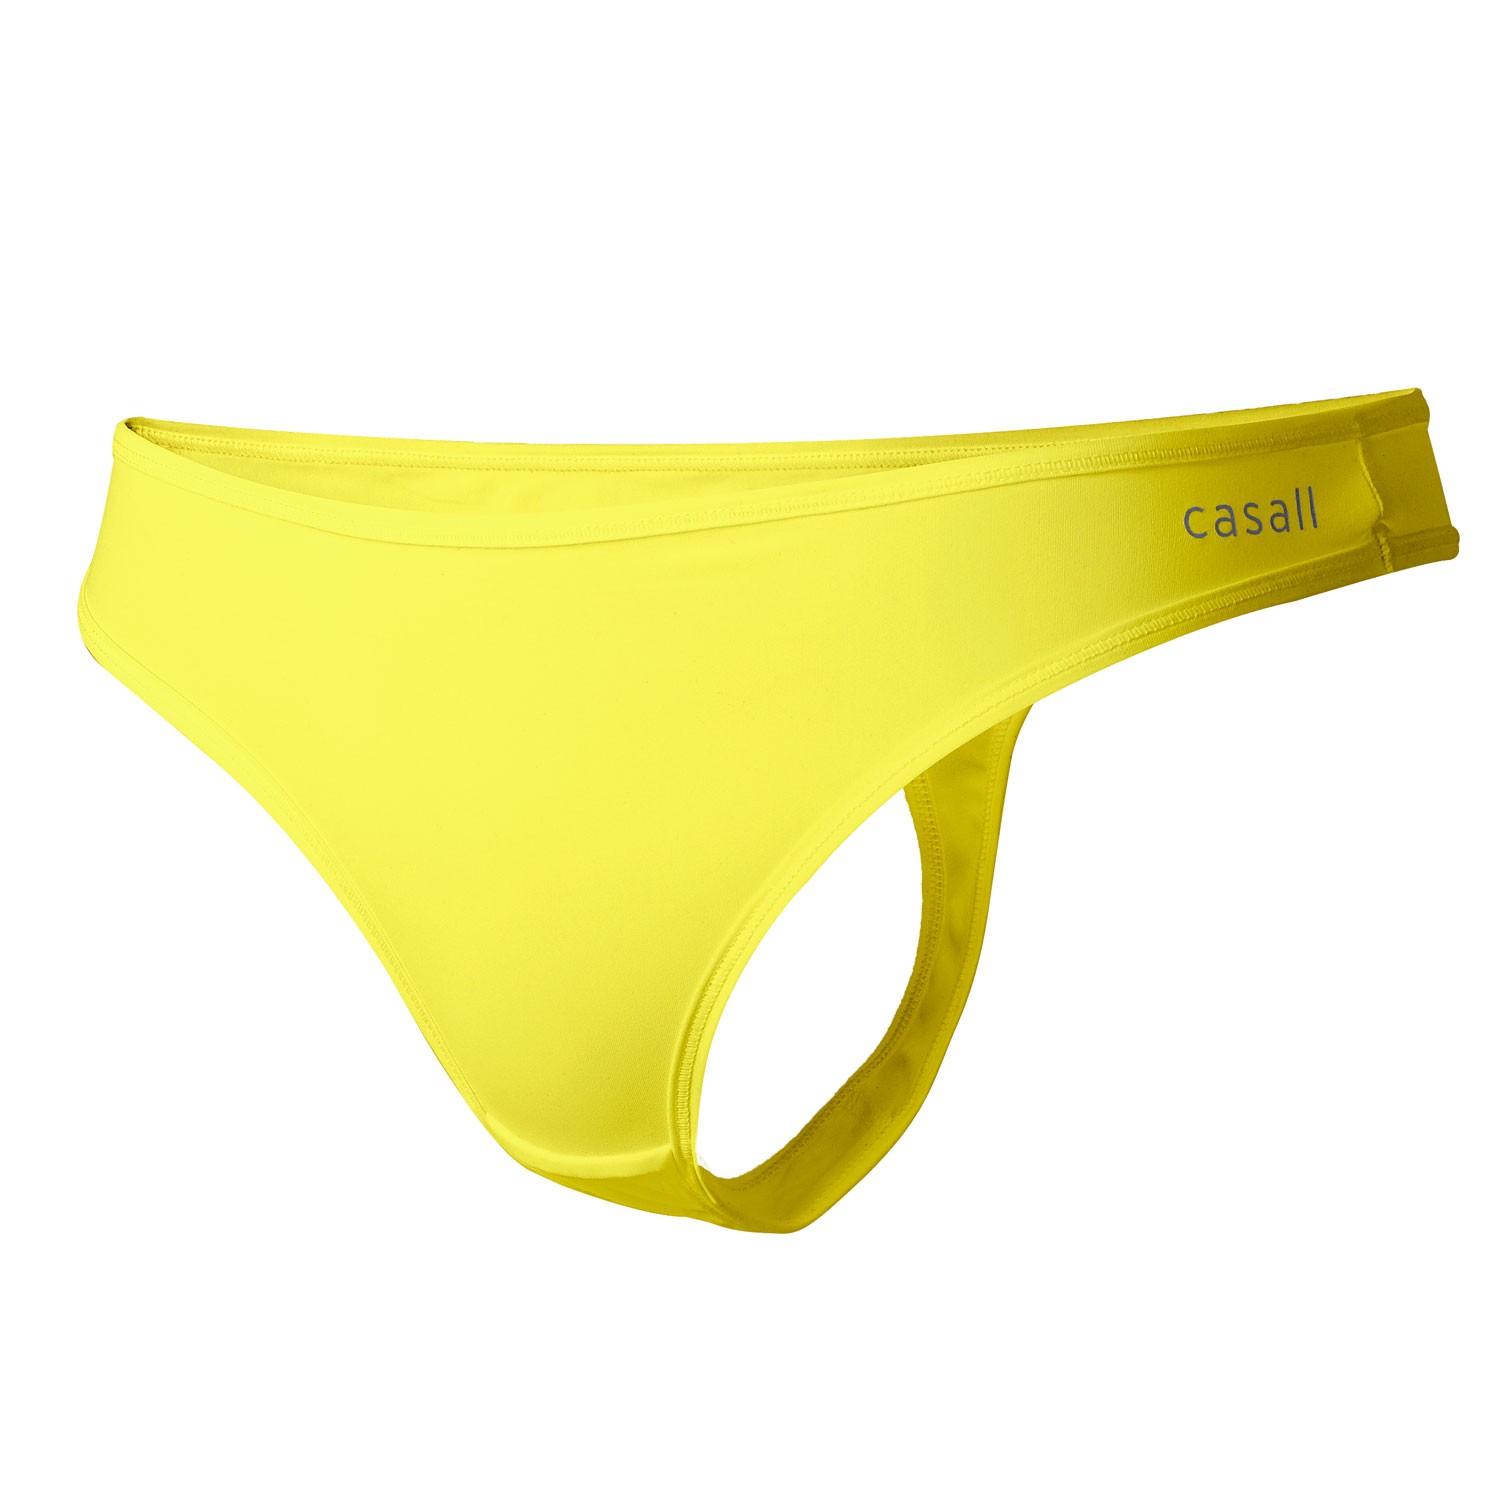 Casall Perfect Thong Punch - Thong - Panties - Underwear - Timarco.co.uk